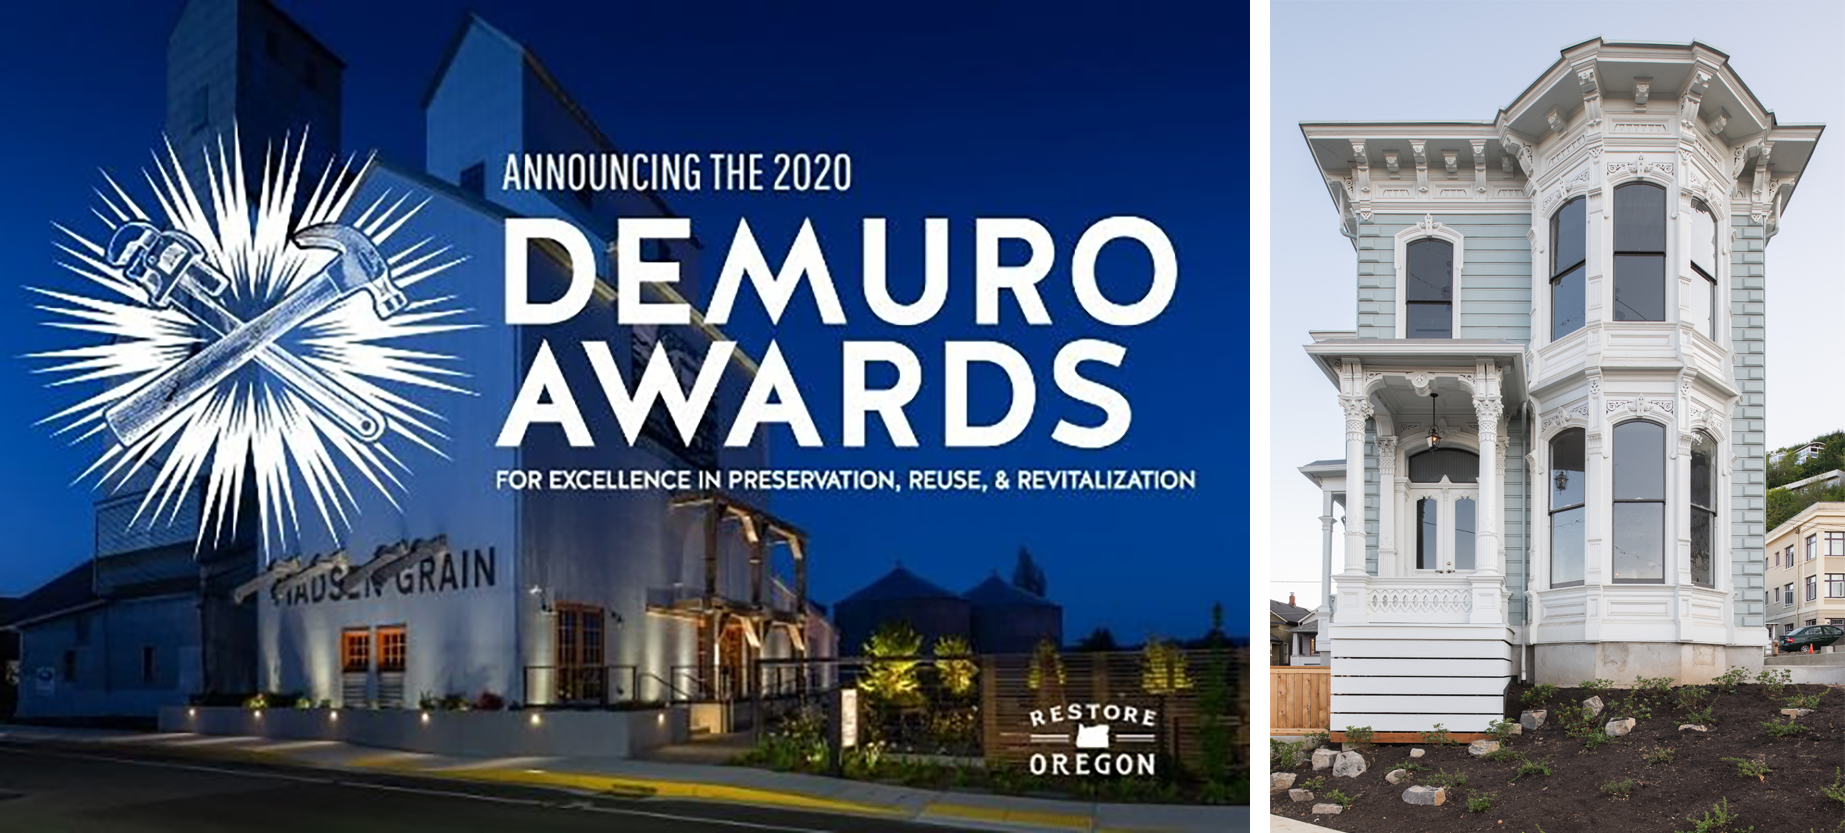 Congratulations to the entire team behind the restoration of the Fried-Durkheimer house on your 2020 DeMuro Award win.